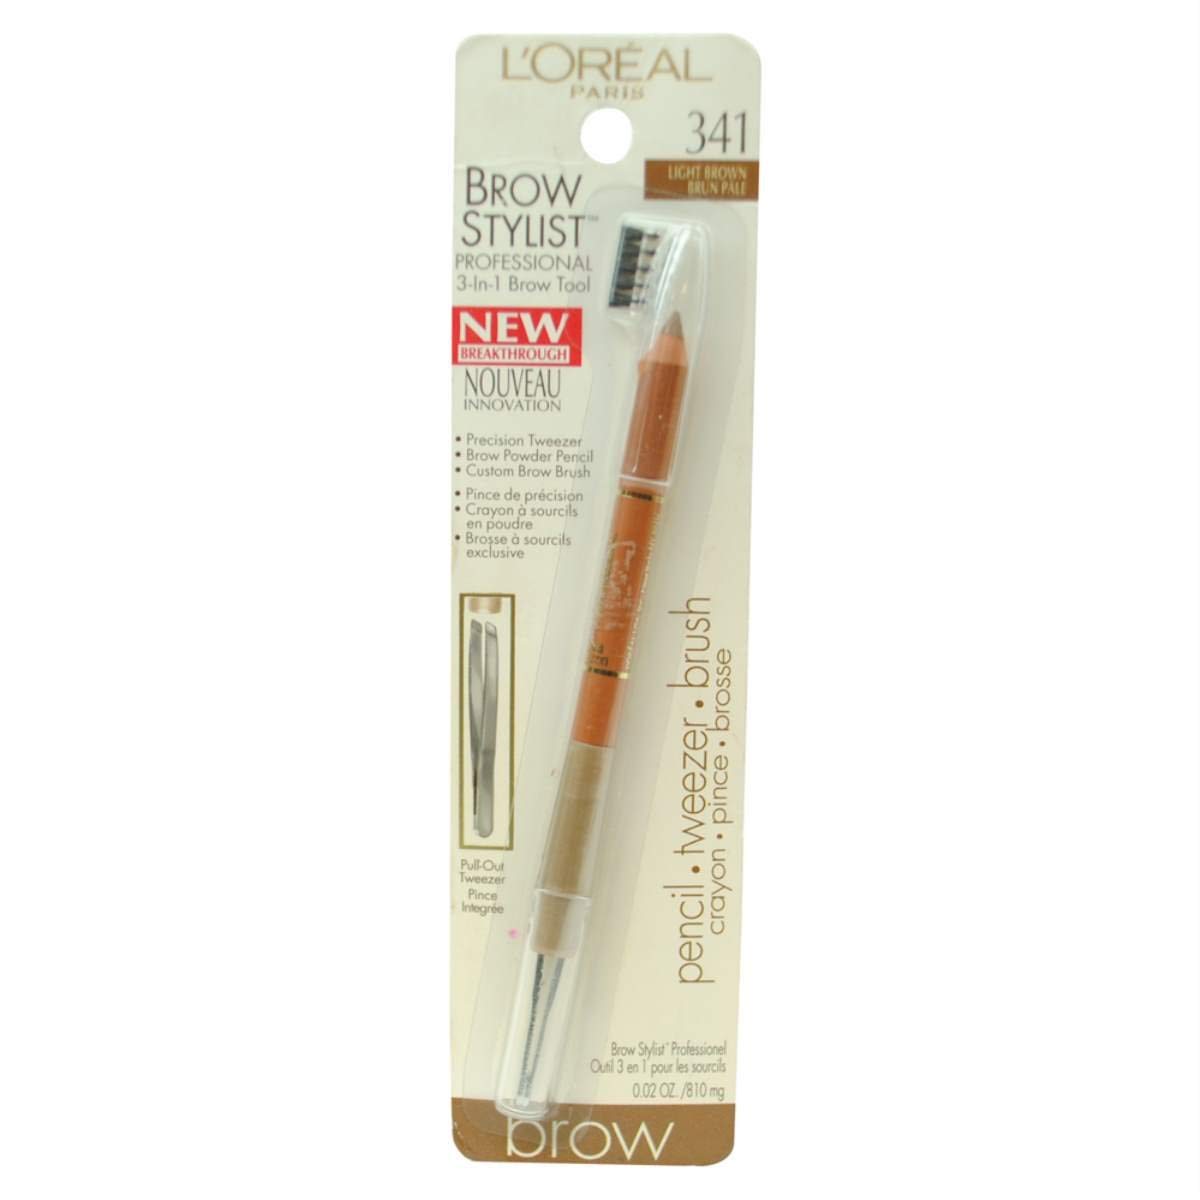 L'Oreal Brow Stylist Professional 3-in-1 Brow Tool, Light Brown 341 - ADDROS.COM